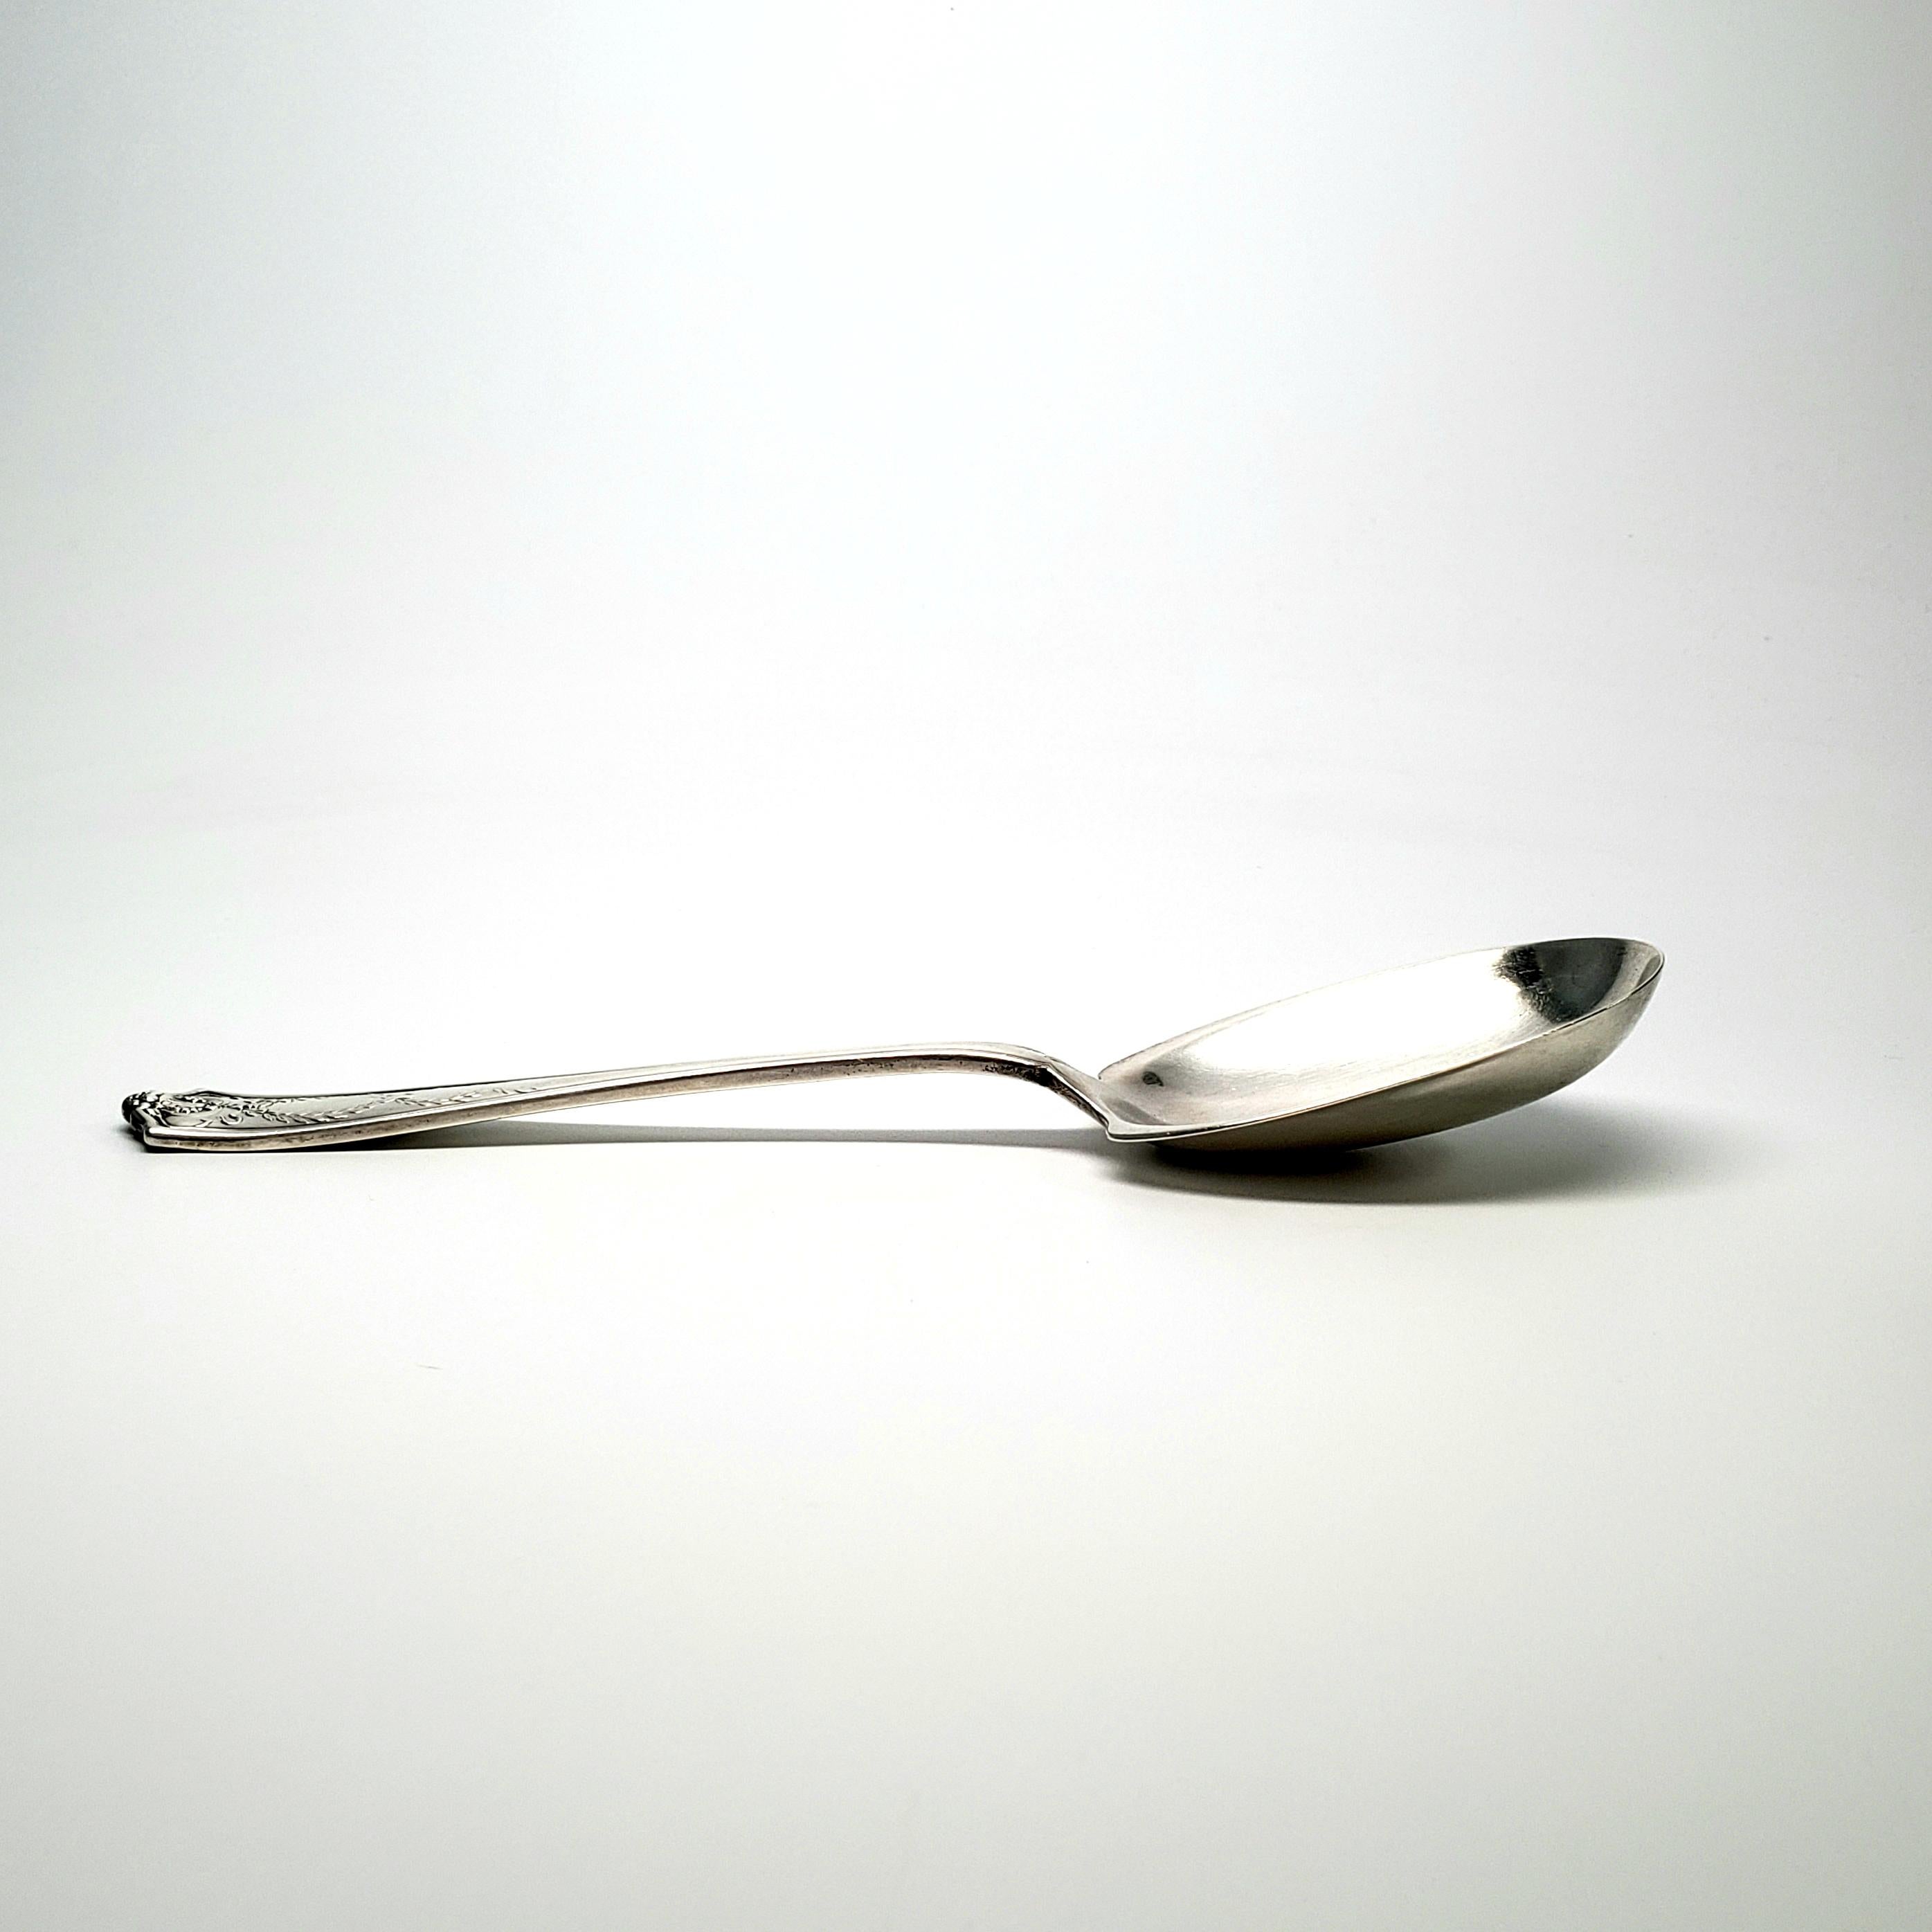 Antique sterling silver solid berry/casserole spoon by Tiffany & Co in the Winthrop pattern, c.1909.

Beautiful large and heavy serving spoon with no monogram.

Measures 9 1/4